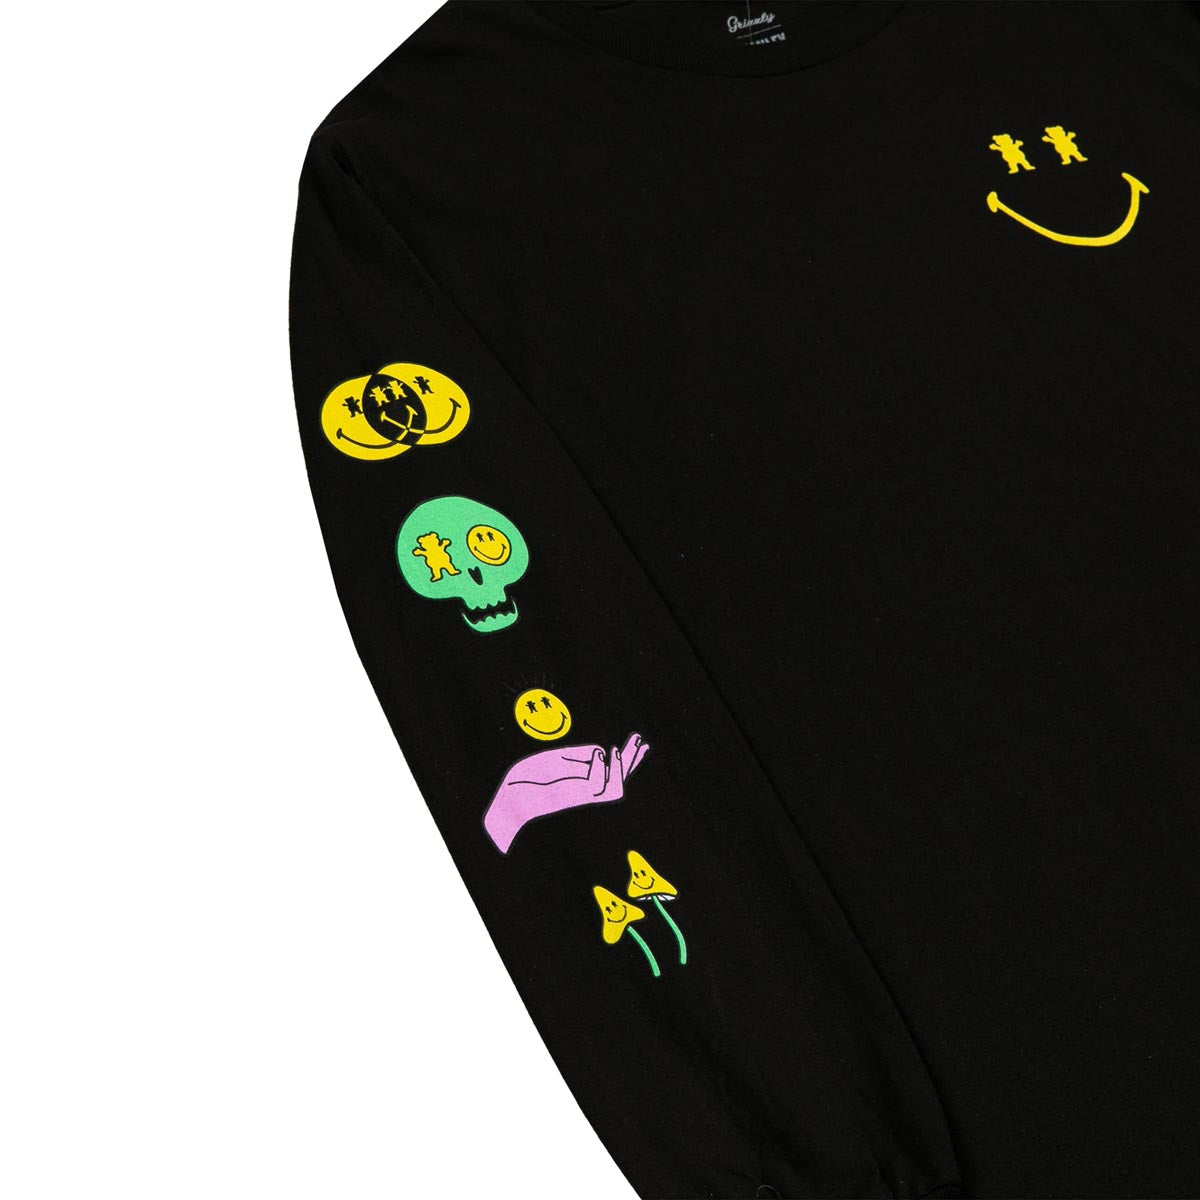 Grizzly x Smiley World Big Smile Long Sleeve T-Shirt - Black image 2